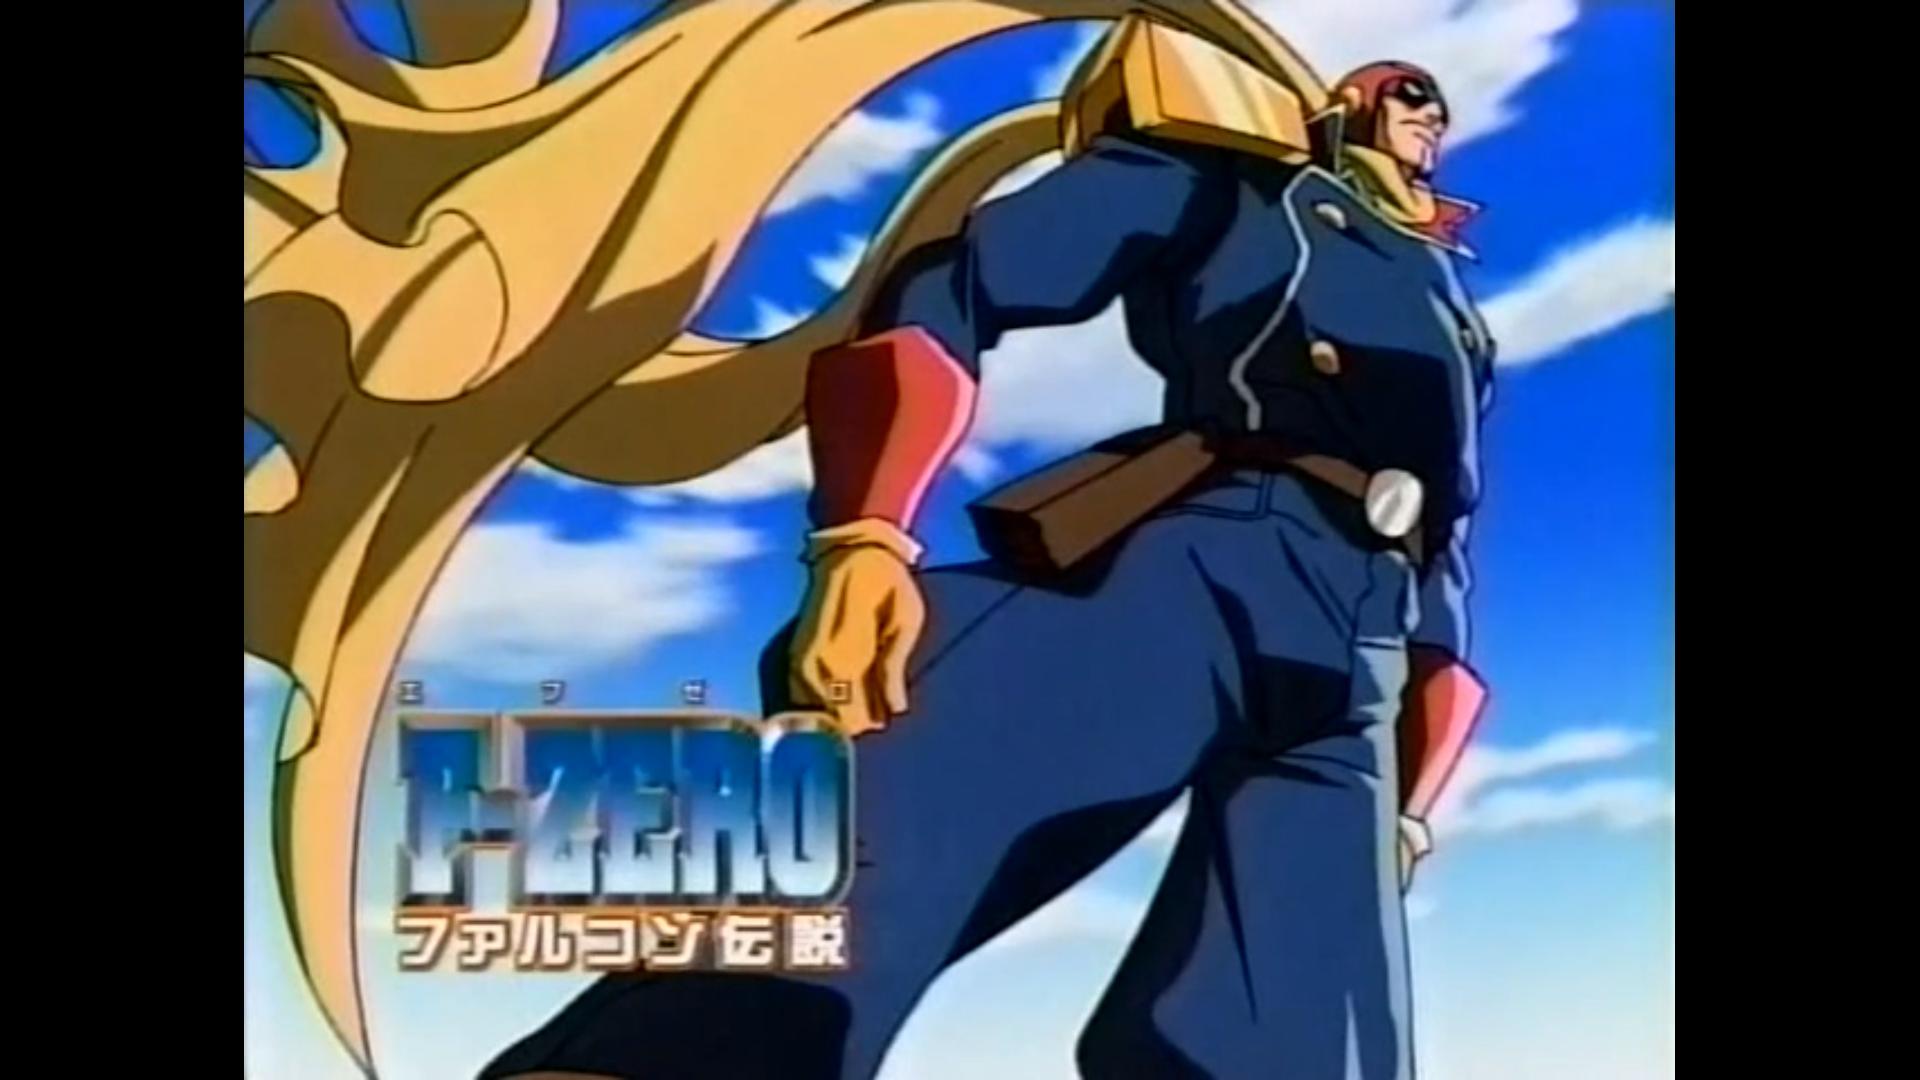 Captain Falcon Those Black Lines Disappear On My Screen When I Set It